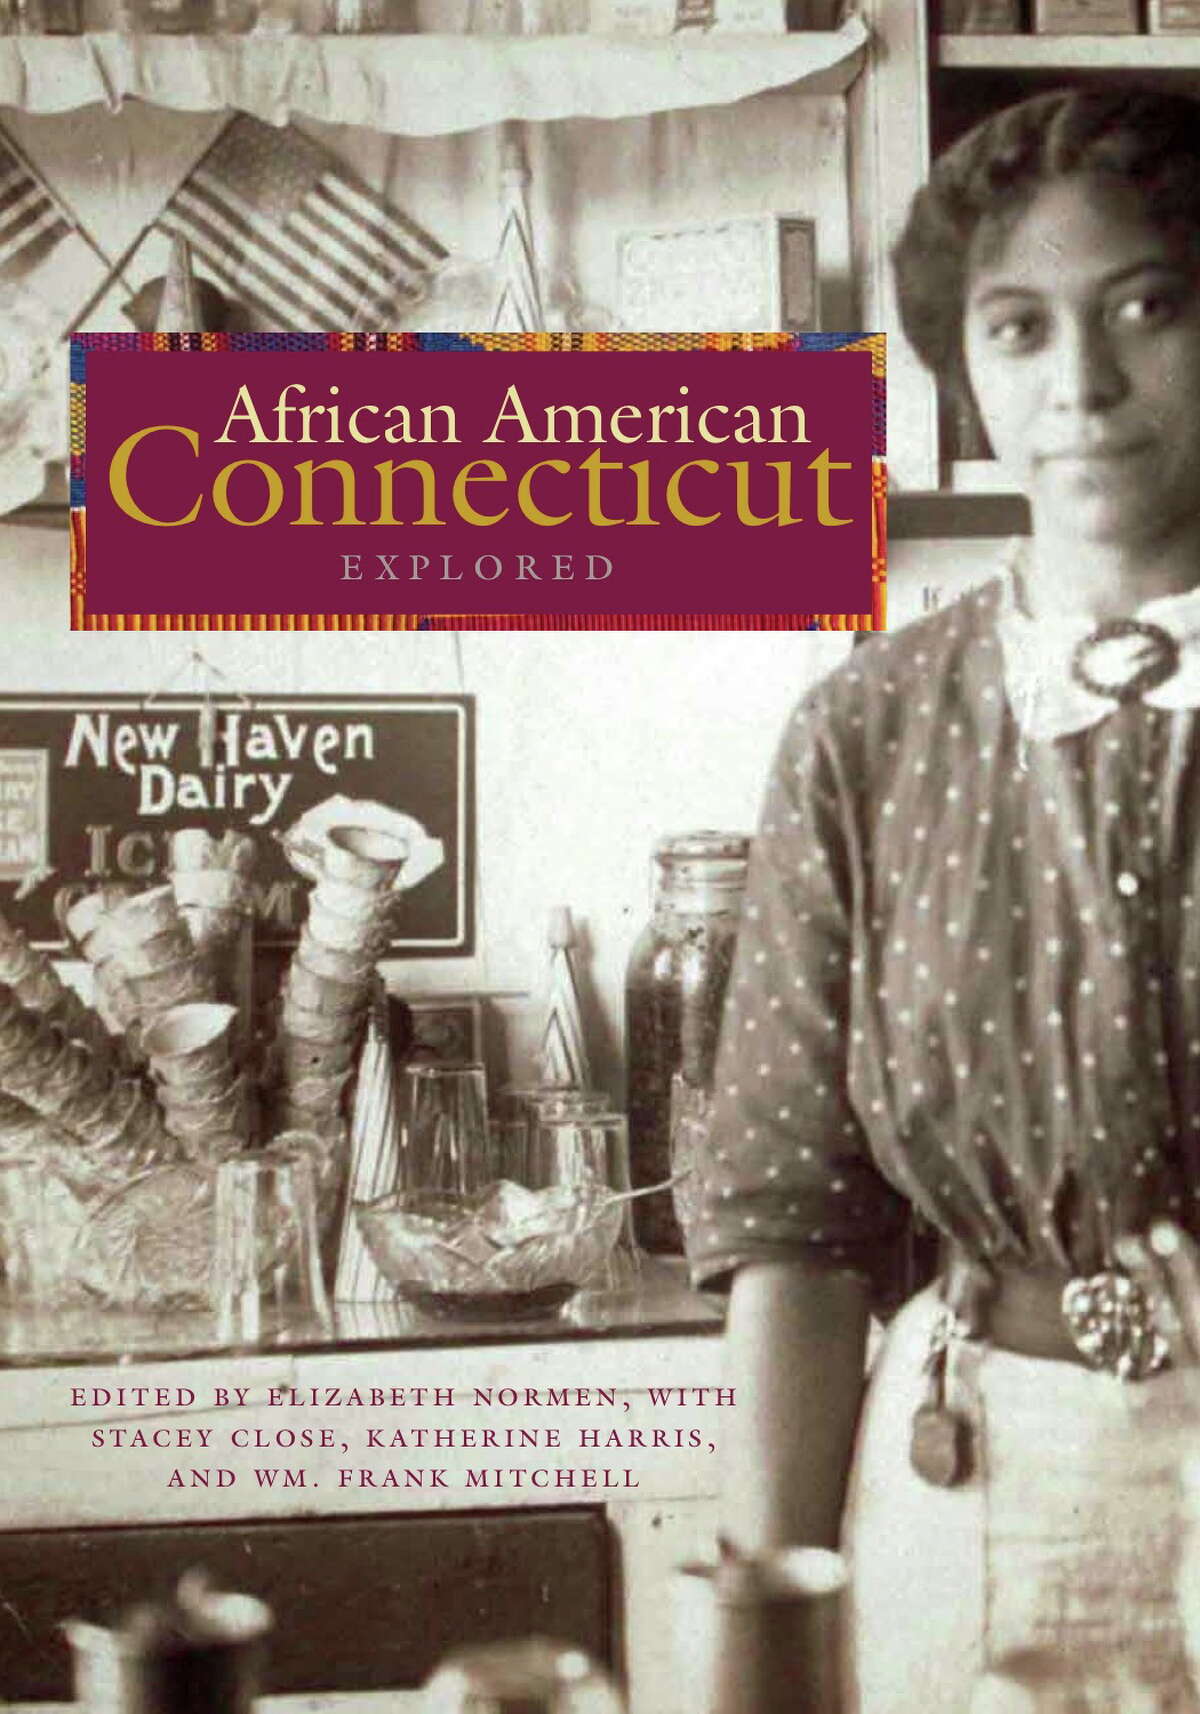 The cover of “African American Connecticut Explored.”